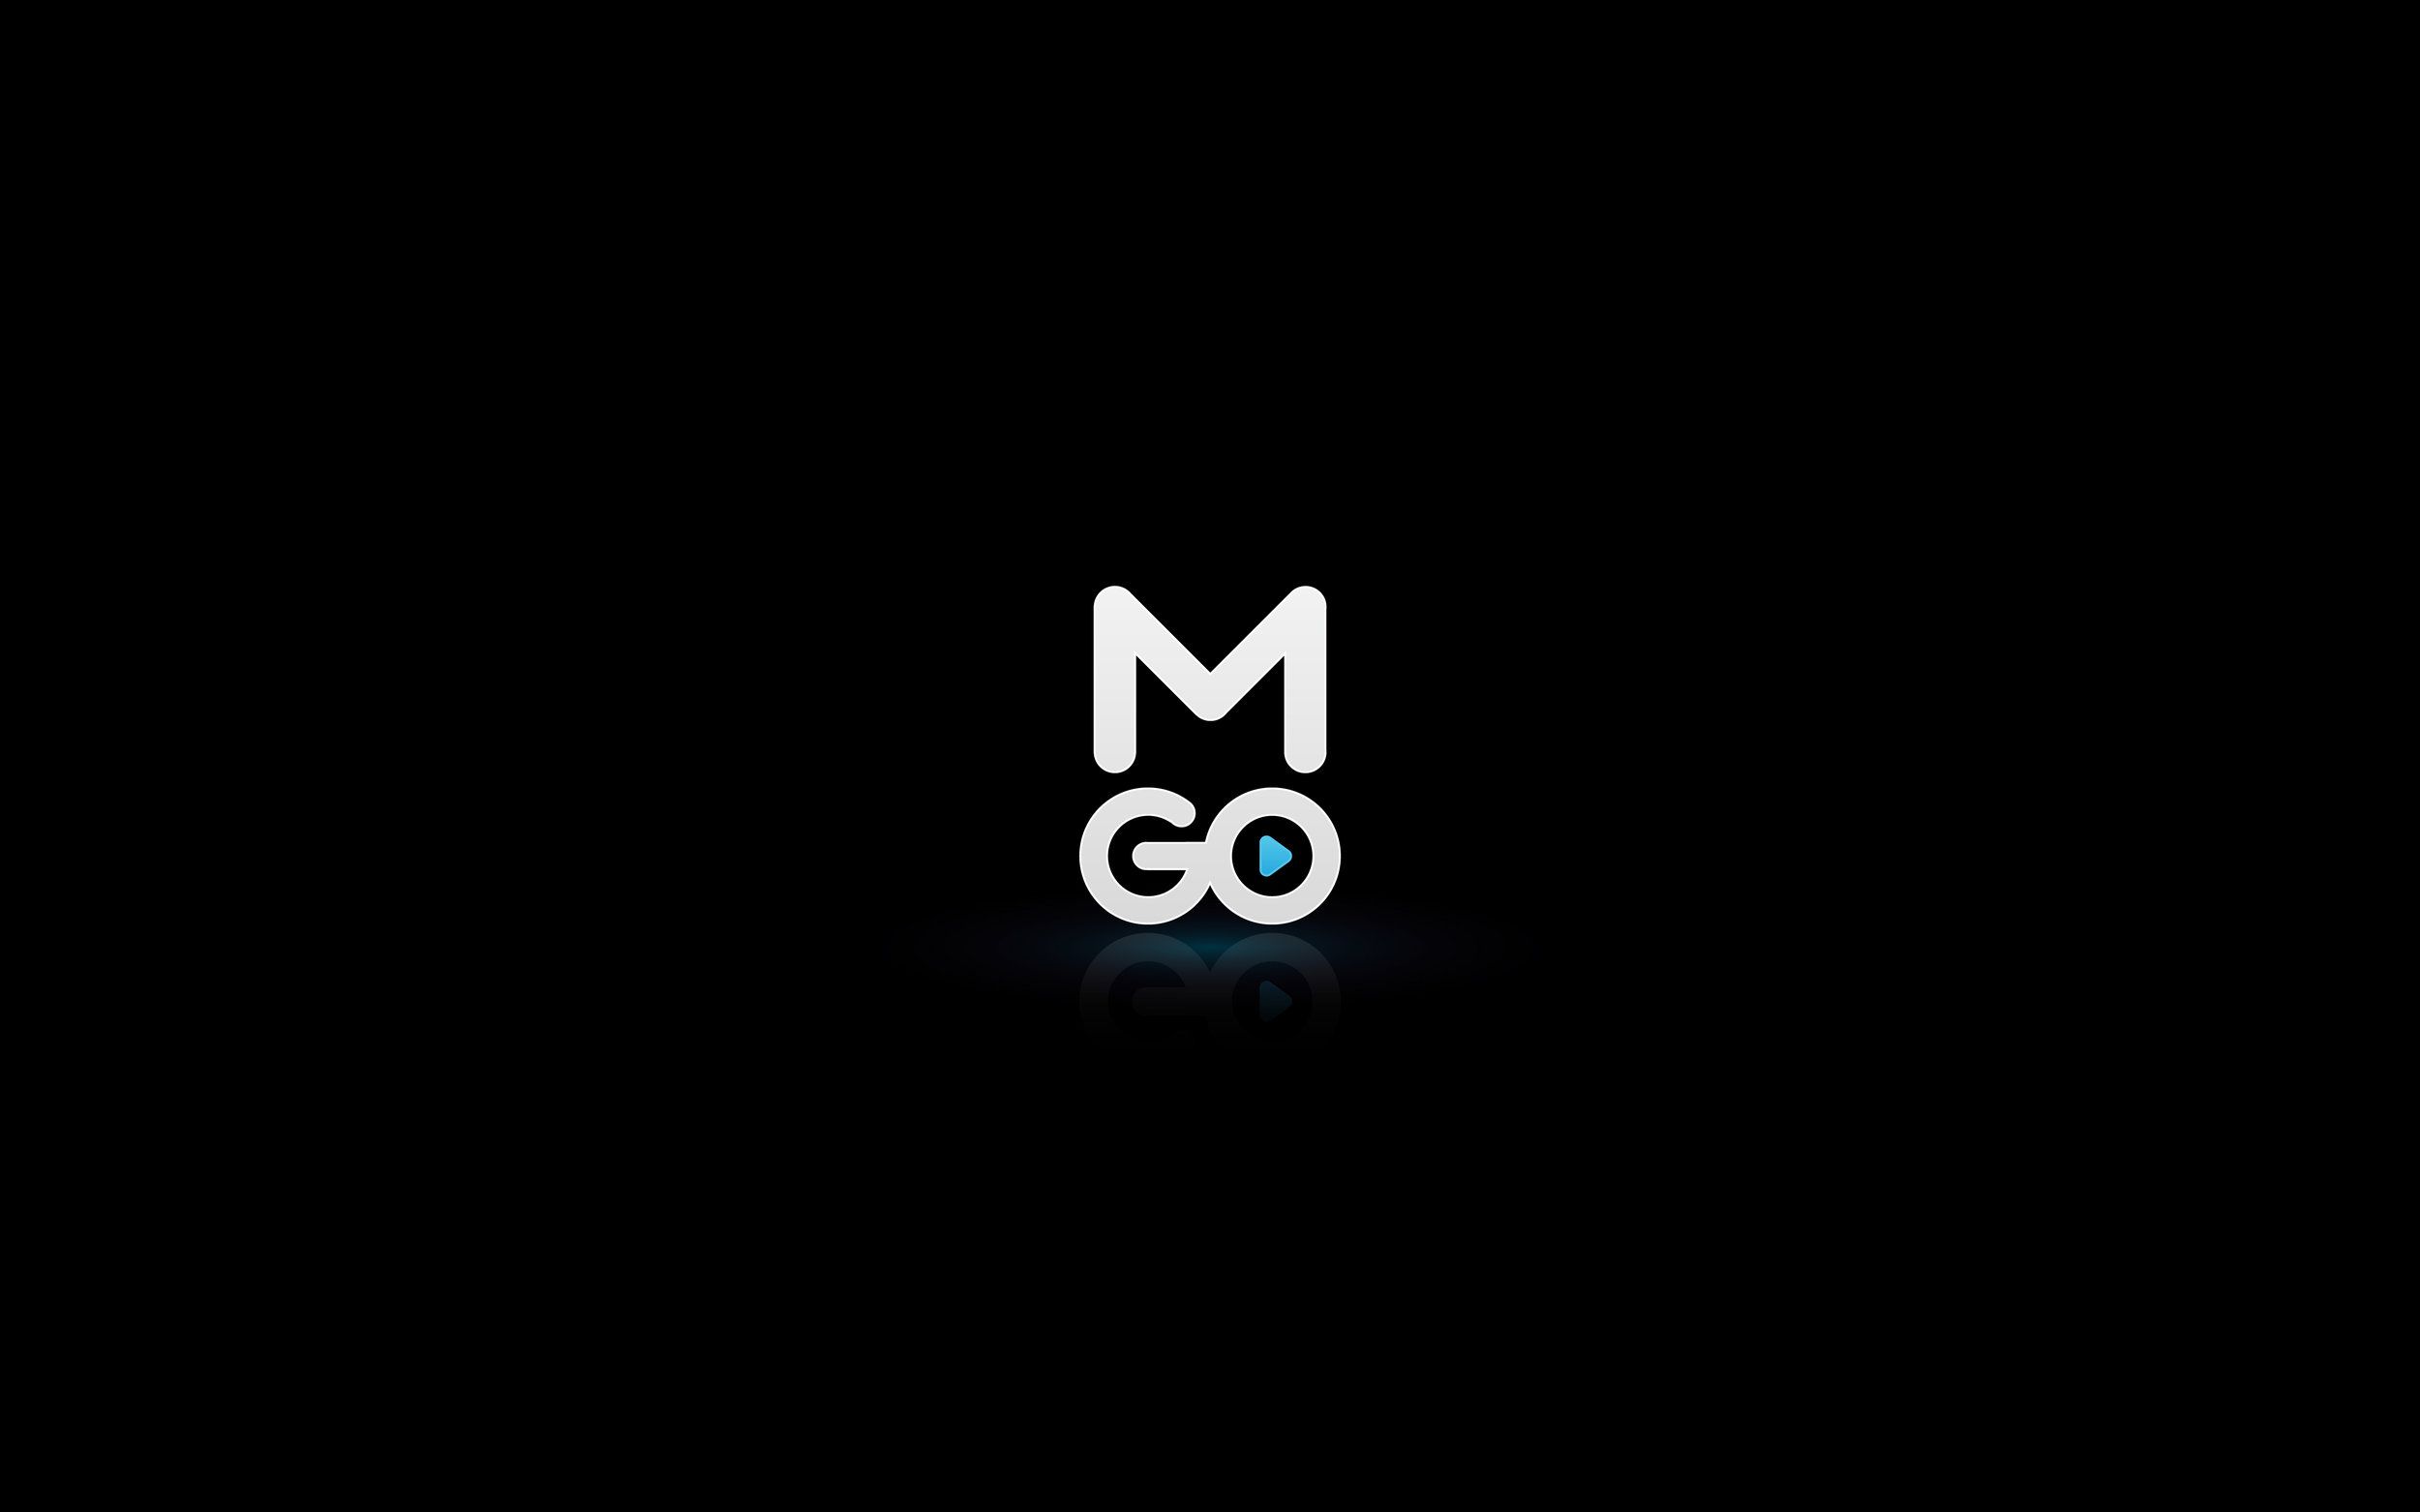 The letter M placed above the word GO, with a play button in the middle of the letter O